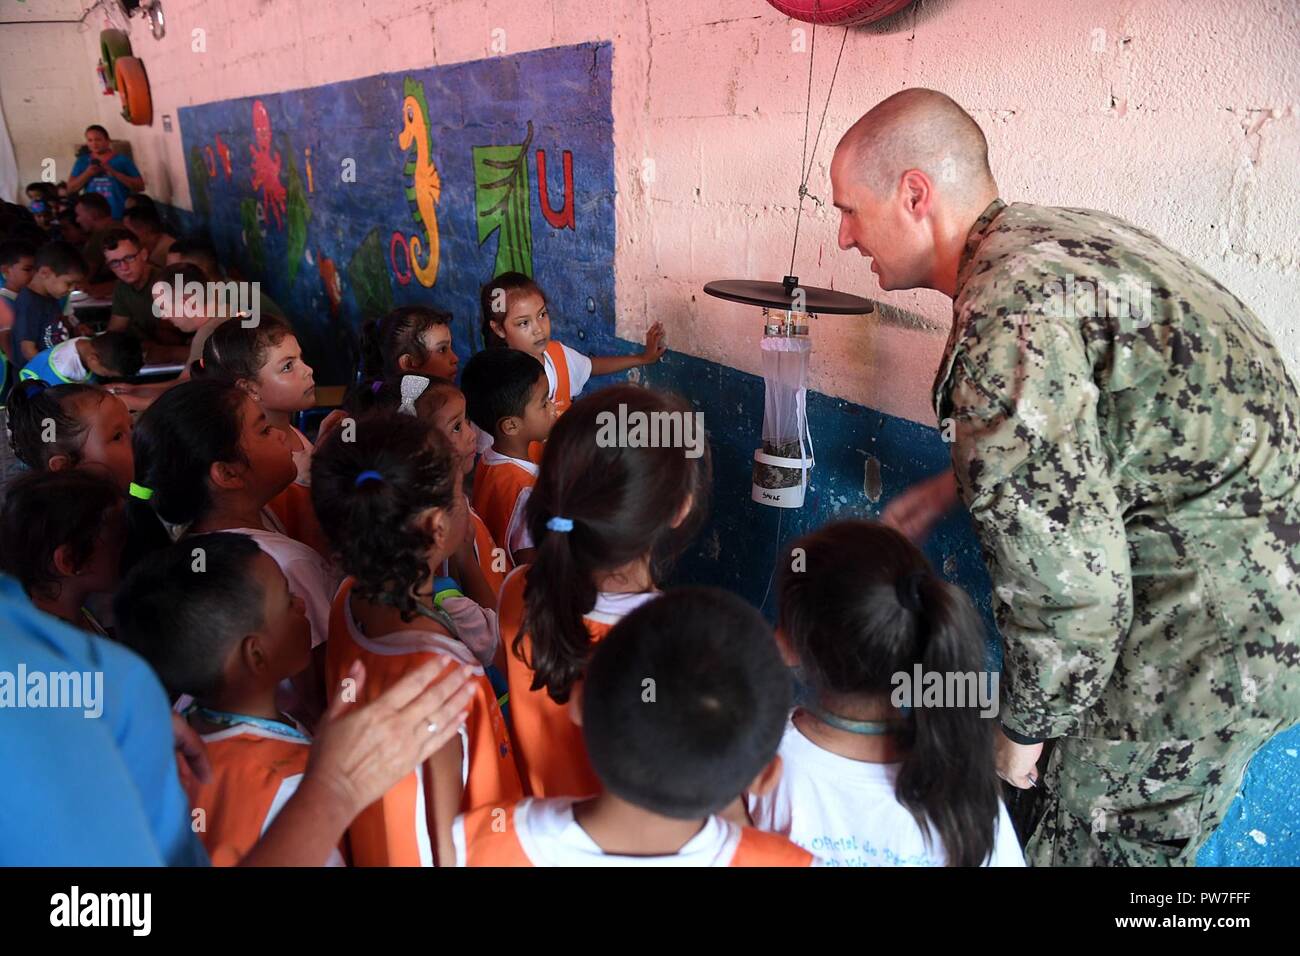 PUERTO BARRIOS, Guatemala (Sept. 22, 2017) Lt. Cmdr. Ian Sutherland, technical director for the Navy Entomology Center of Excellence, shows students a mosquito trap at Escuela Natalia Corriz Viuda de Morales, a Guatemalan primary school, during a Southern Partnership Station 17 community relations project (COMREL). SPS 17 is a U.S. Navy deployment executed by U.S. Naval Forces Southern Command/U.S. 4th Fleet, focused on subject matter expert exchanges with partner nation militaries and security forces in Central and South America. Stock Photo